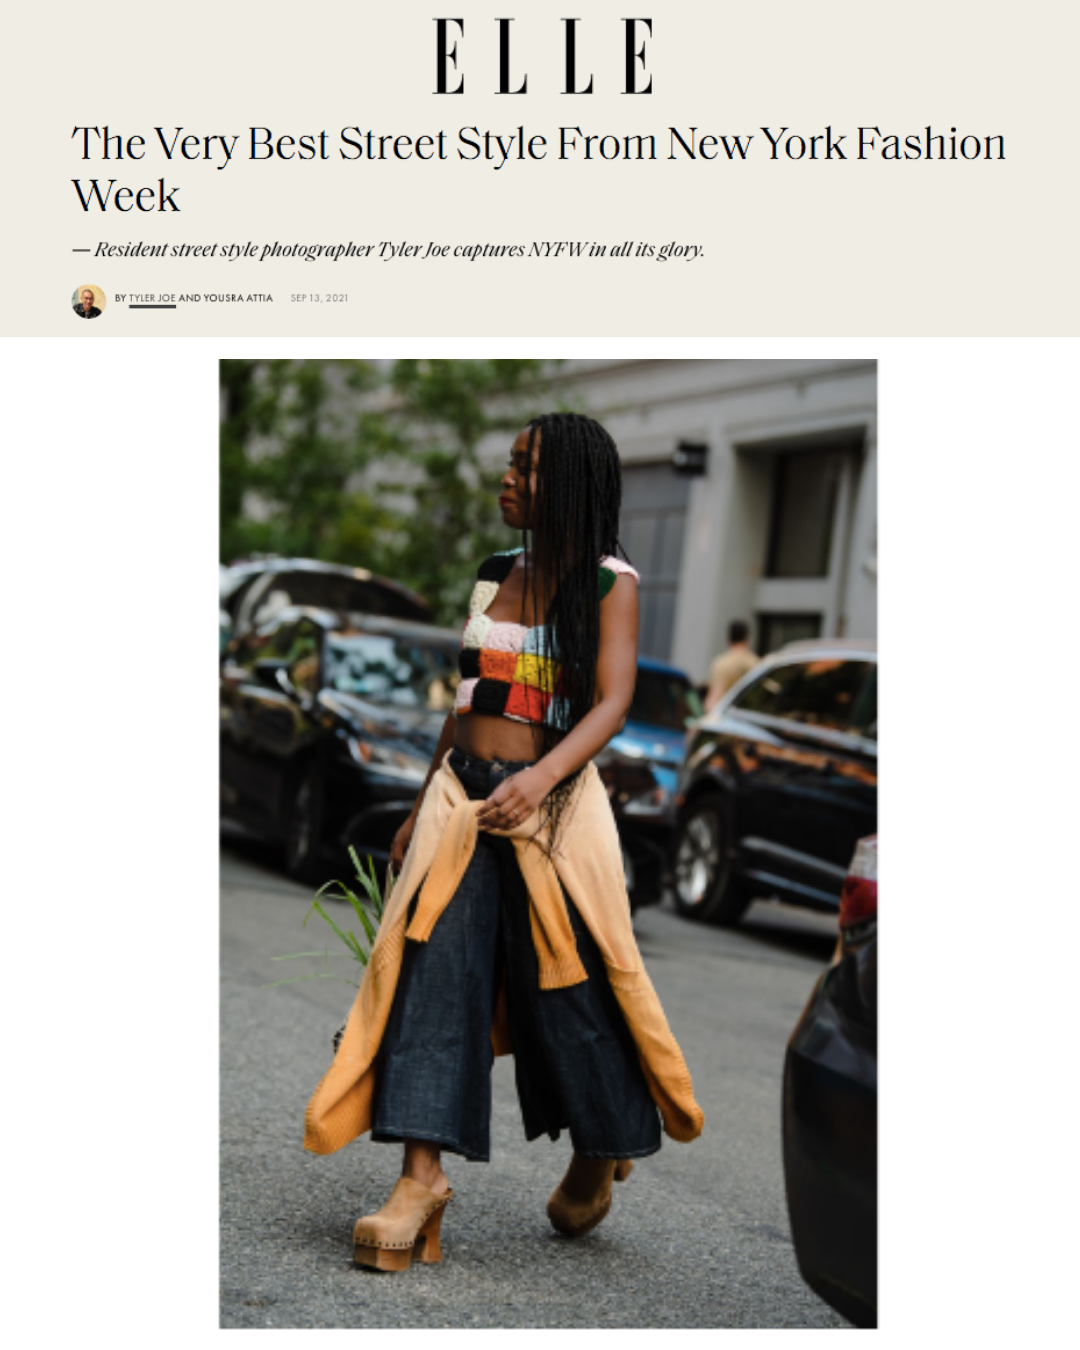 ELLE | The Very Best Street Style from New York Fashion Week